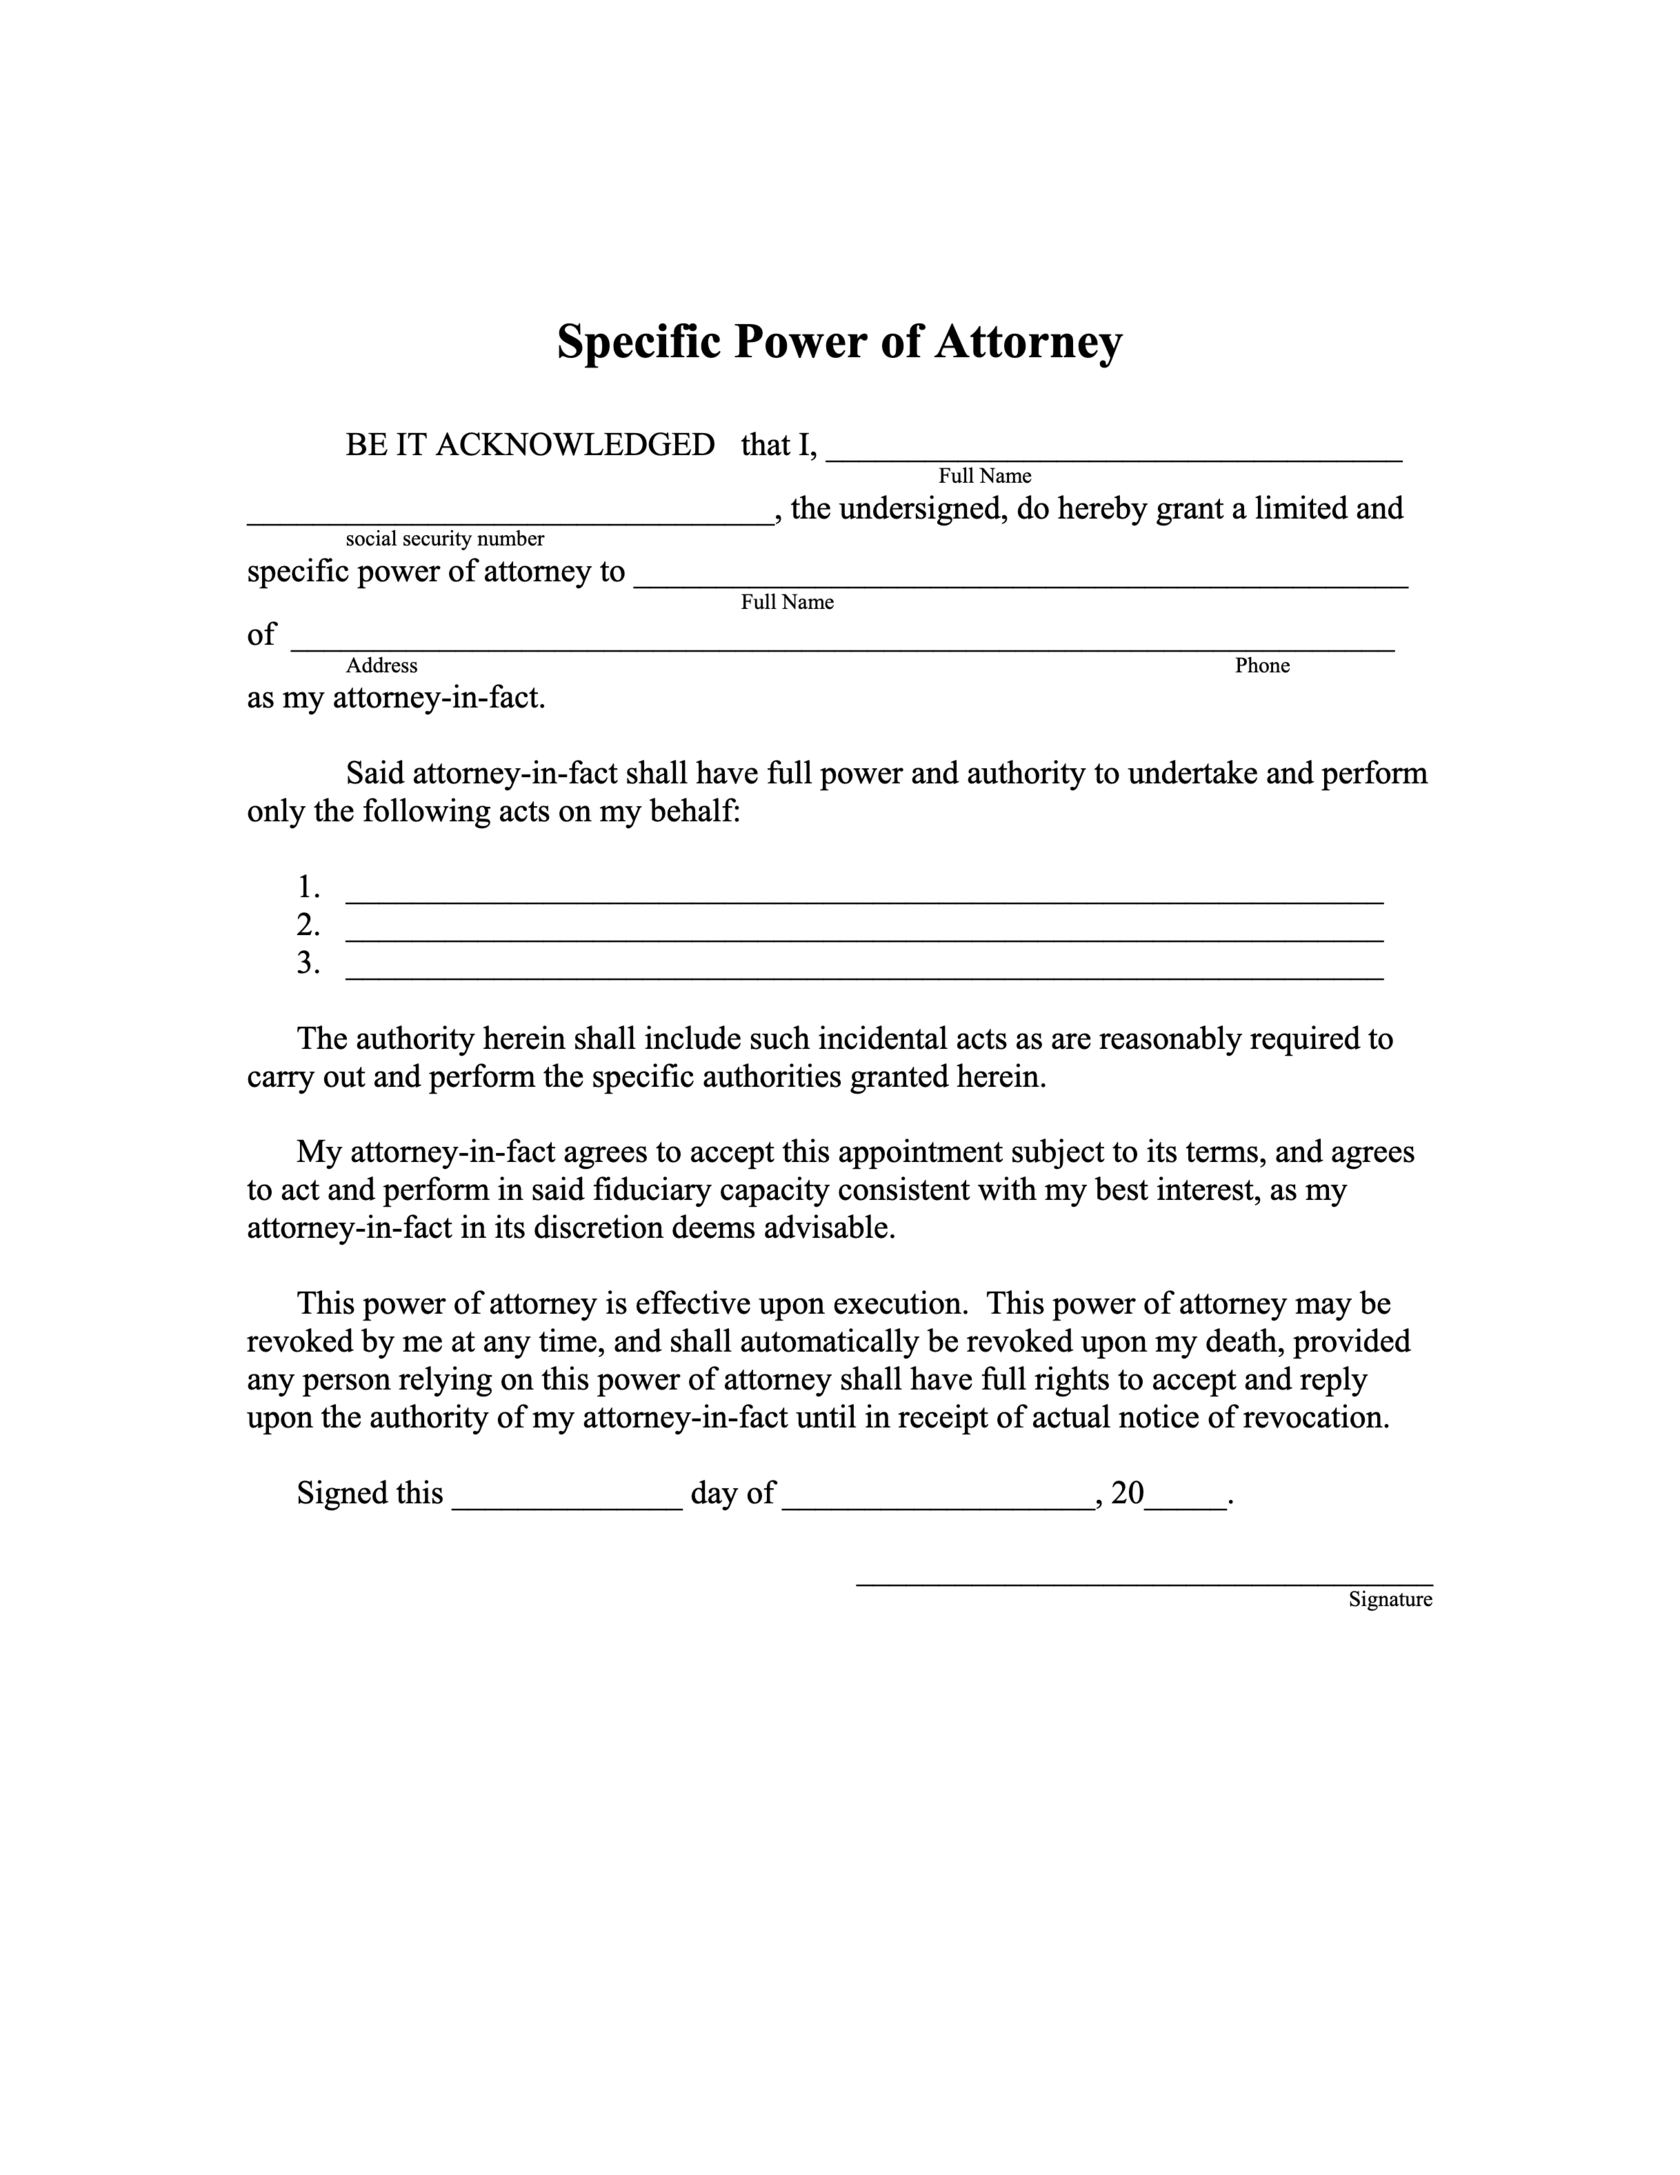 Specific Power of Attorney on PDFLiner